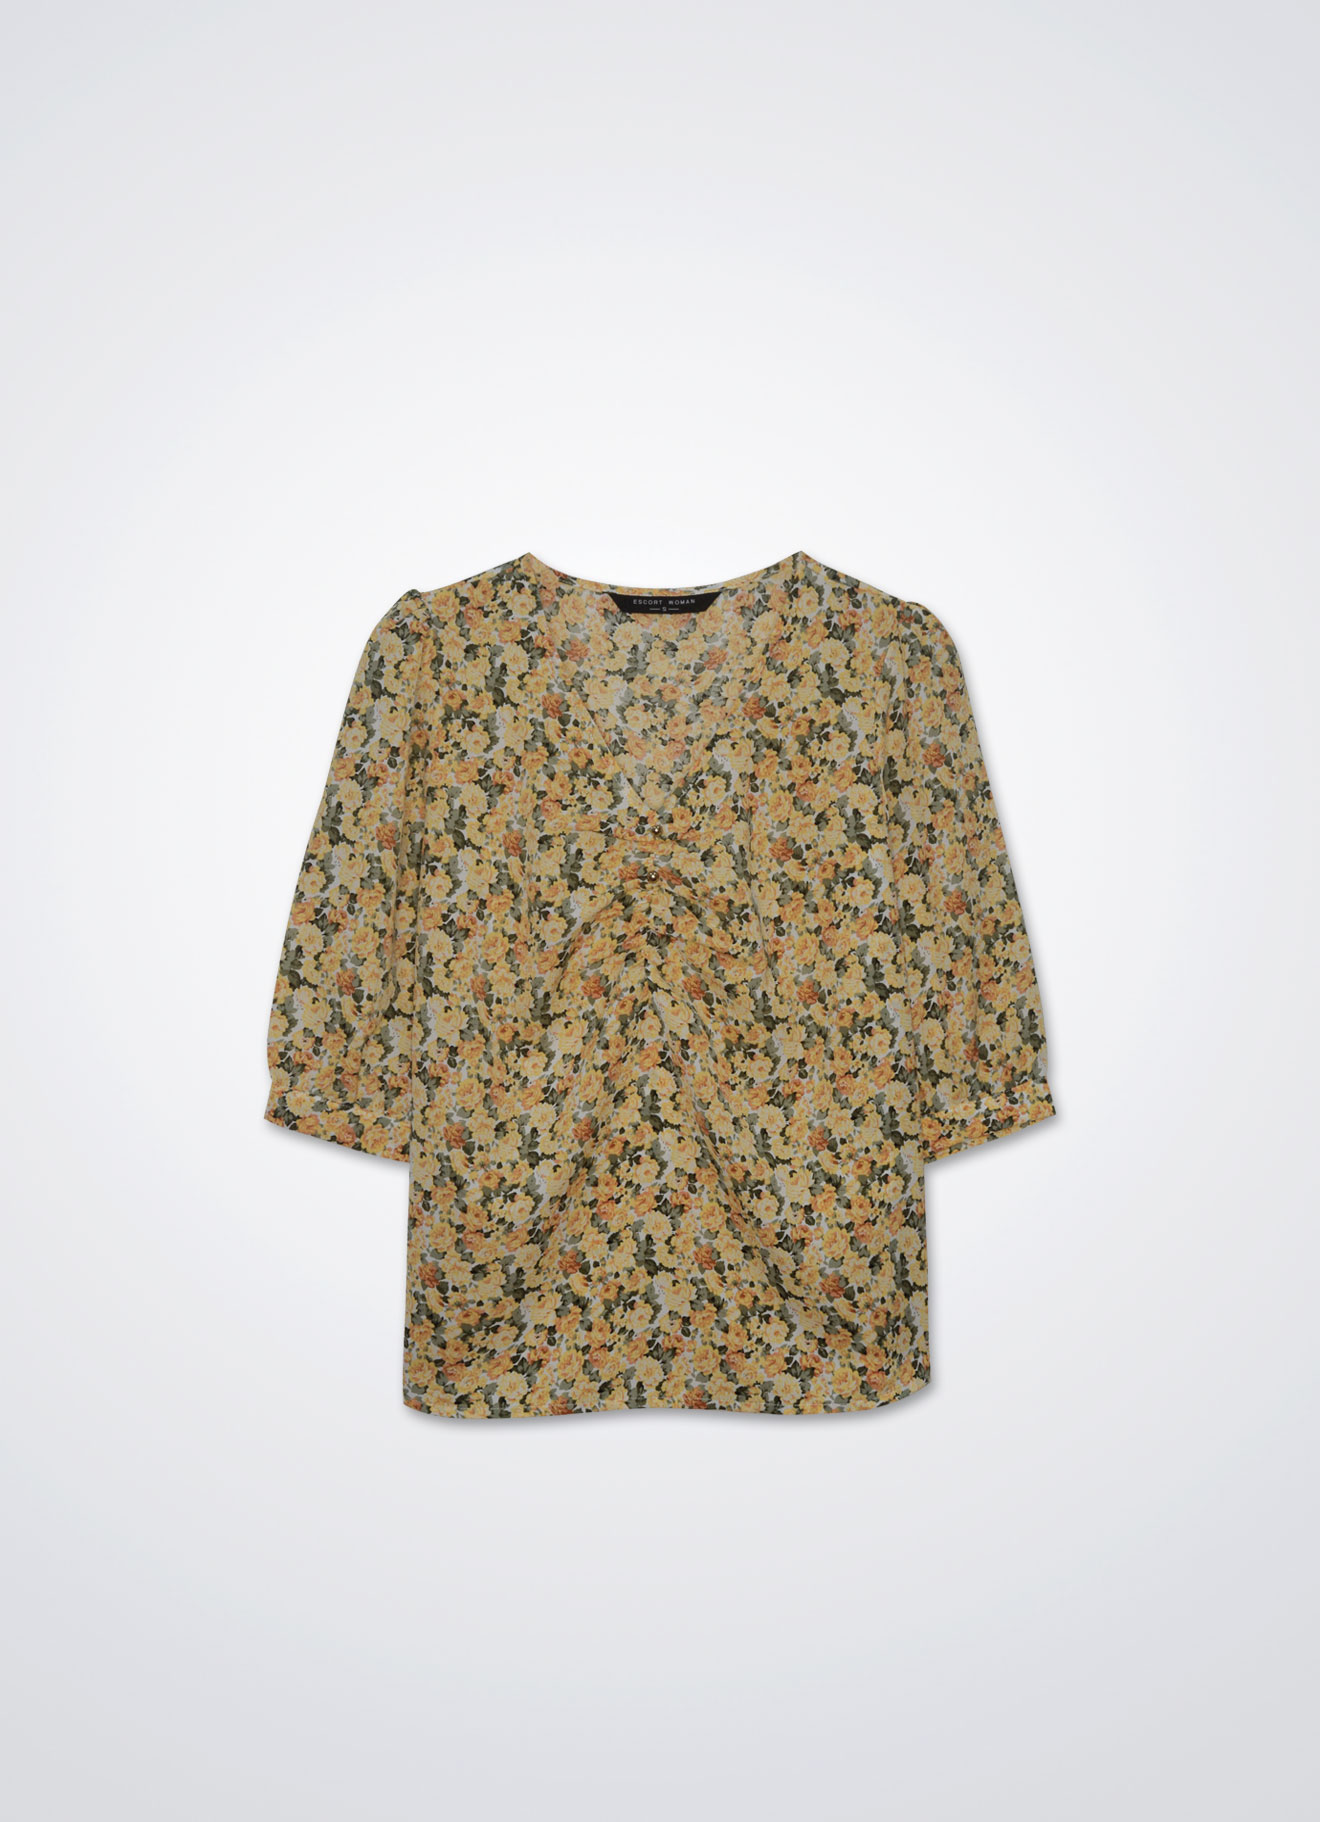 Aspen-Gold by Floral Printed Blouse